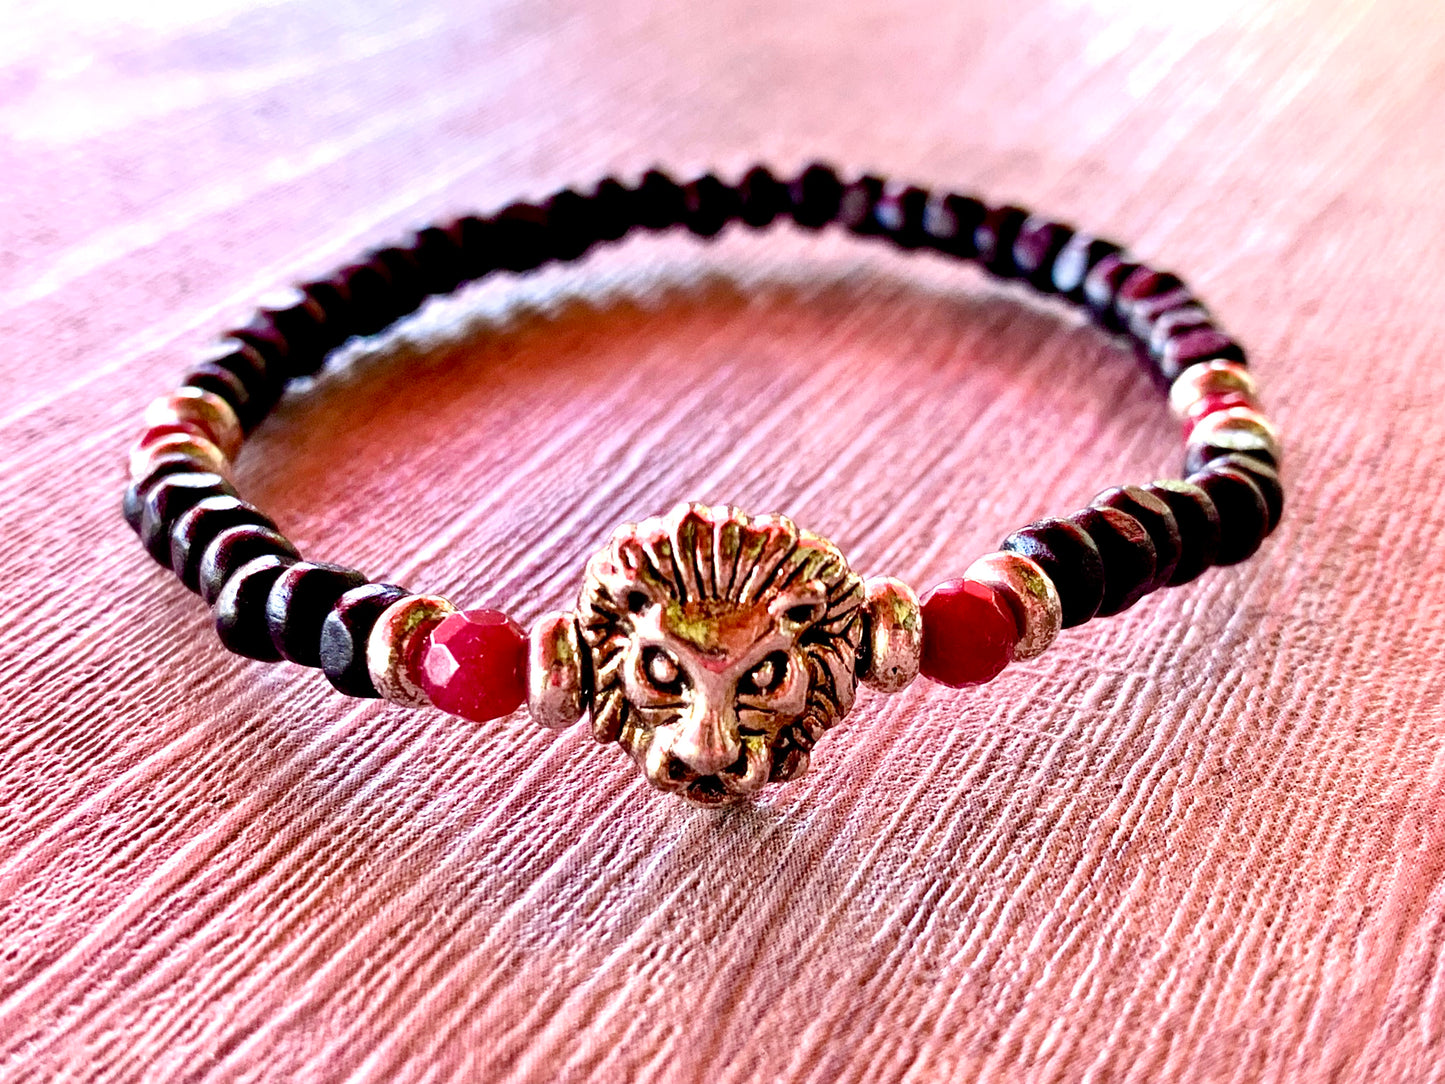 Leo Handmade Ruby, Gold Plated Hematite, and White Lava Or Black Wood Beaded Expandable Bracelet with Lion Charm